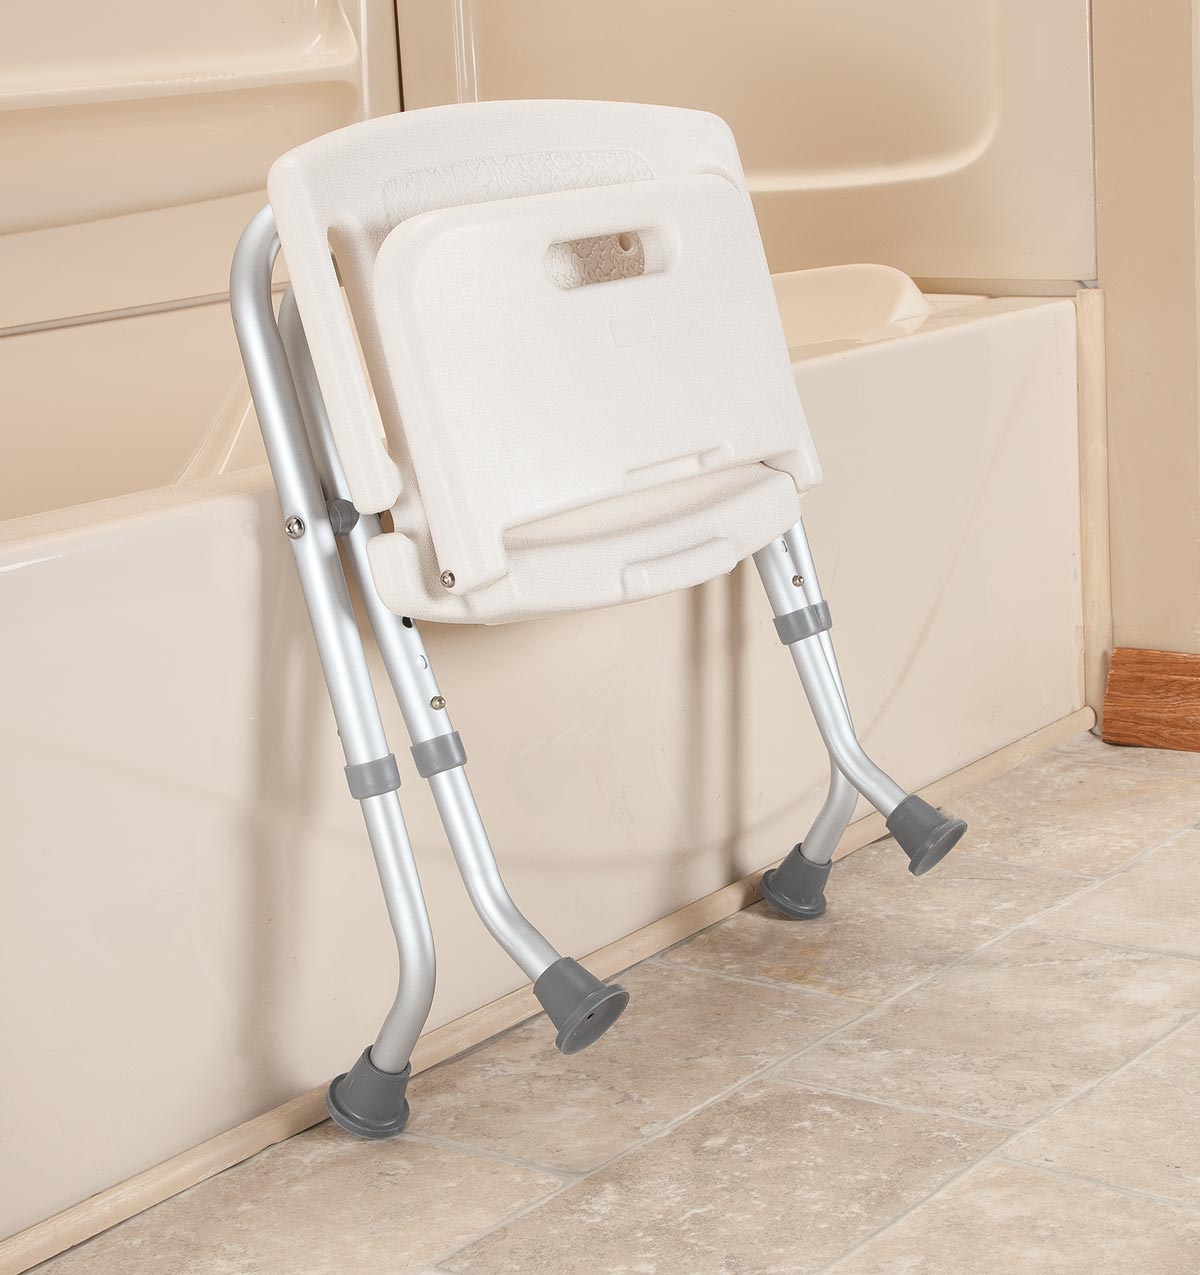 Fox Valley Traders Folding Bath Seat with Back Support, Portable Shower Bench, White, White 